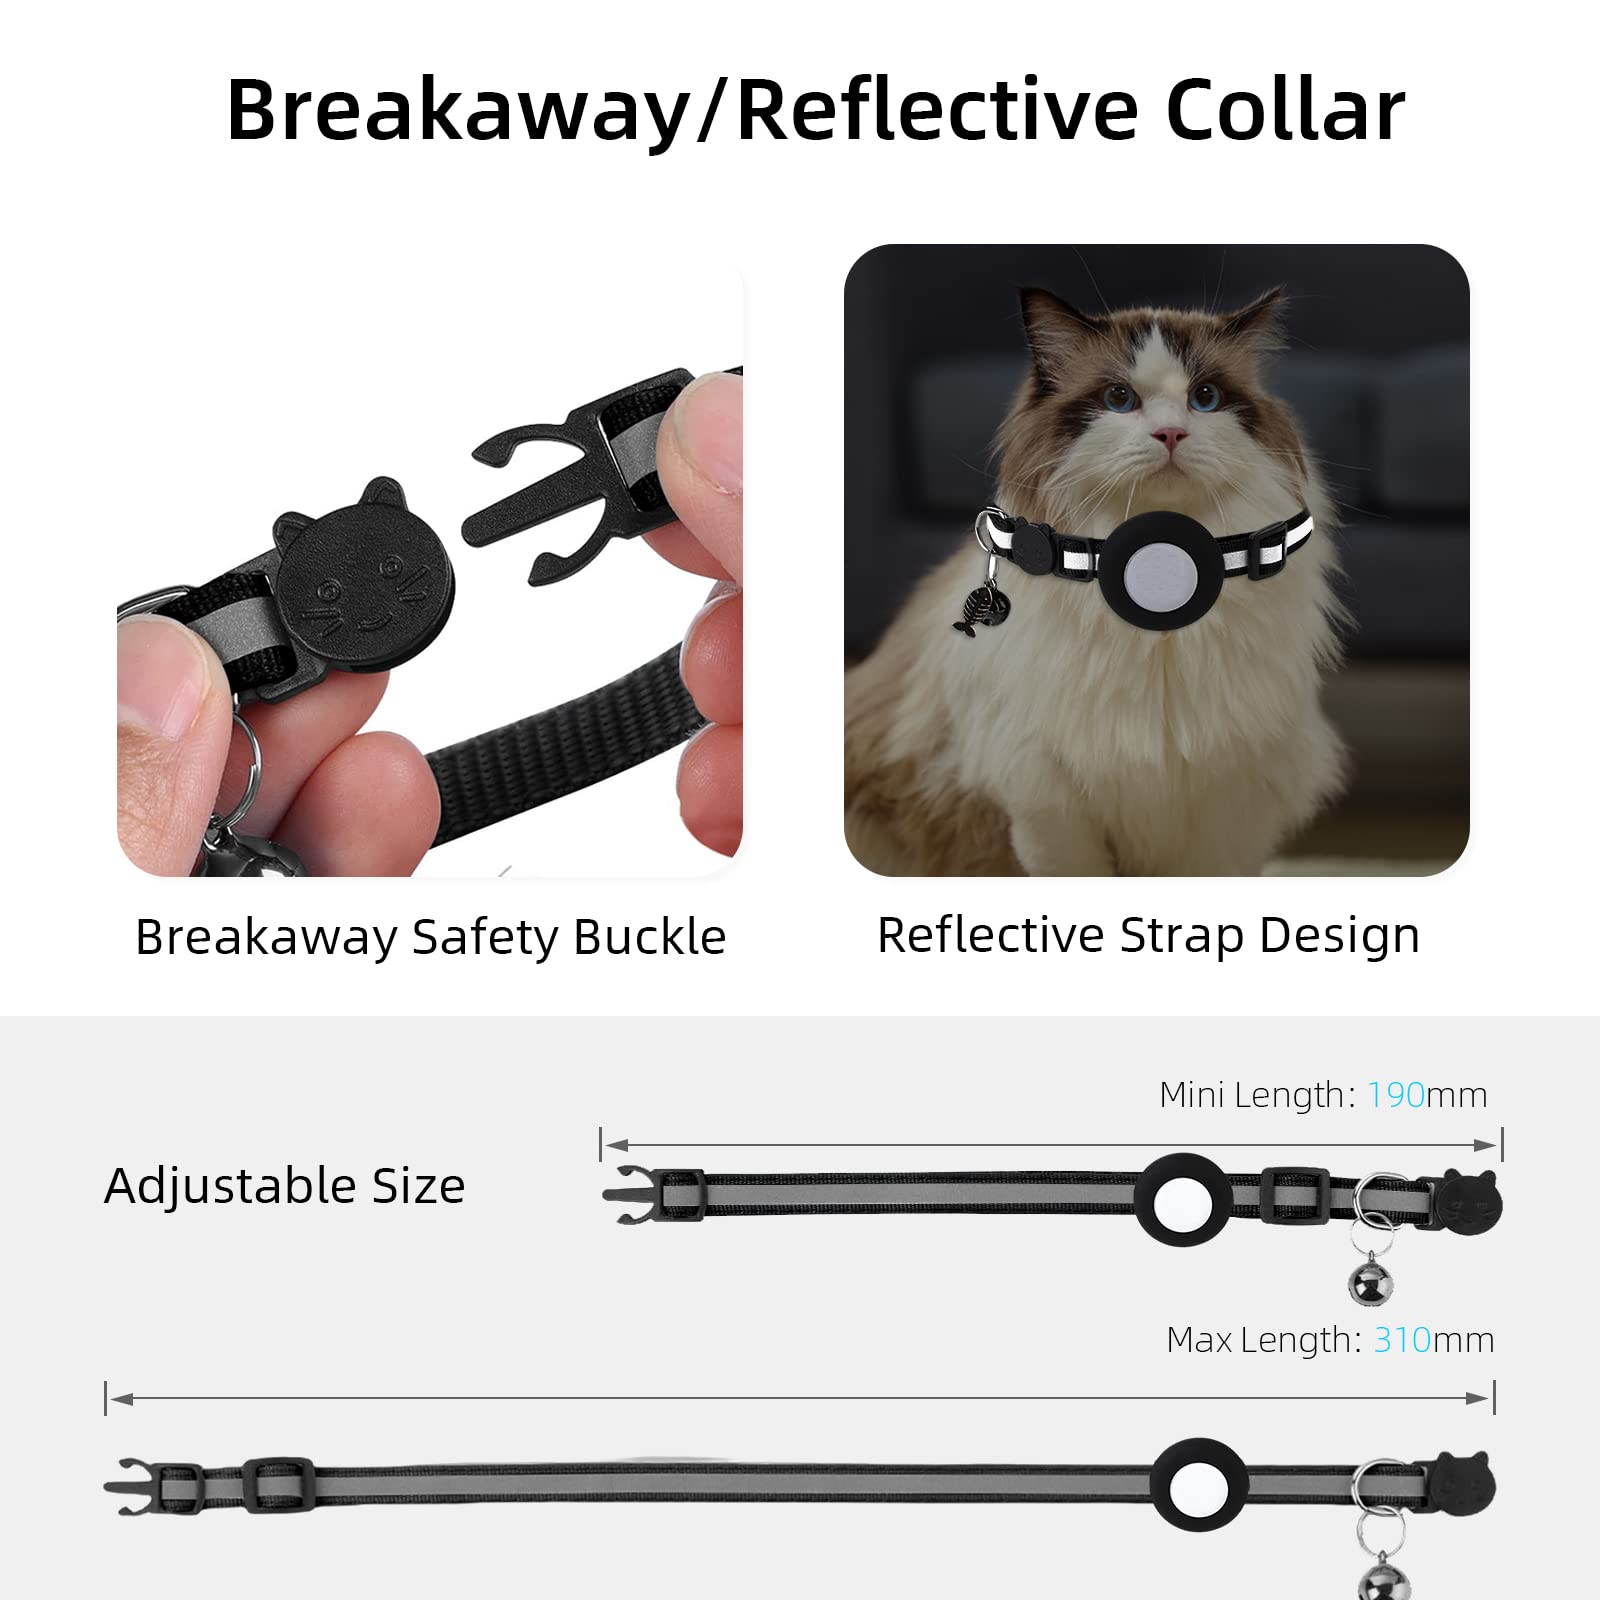 SimpleThings Pet Tracker for Cats, Reflective Cat Collar with Tracking Device Compatible with Apple Airtag Find My Network (iOS Only), Real-Time Location and No Subscription Fee Needed